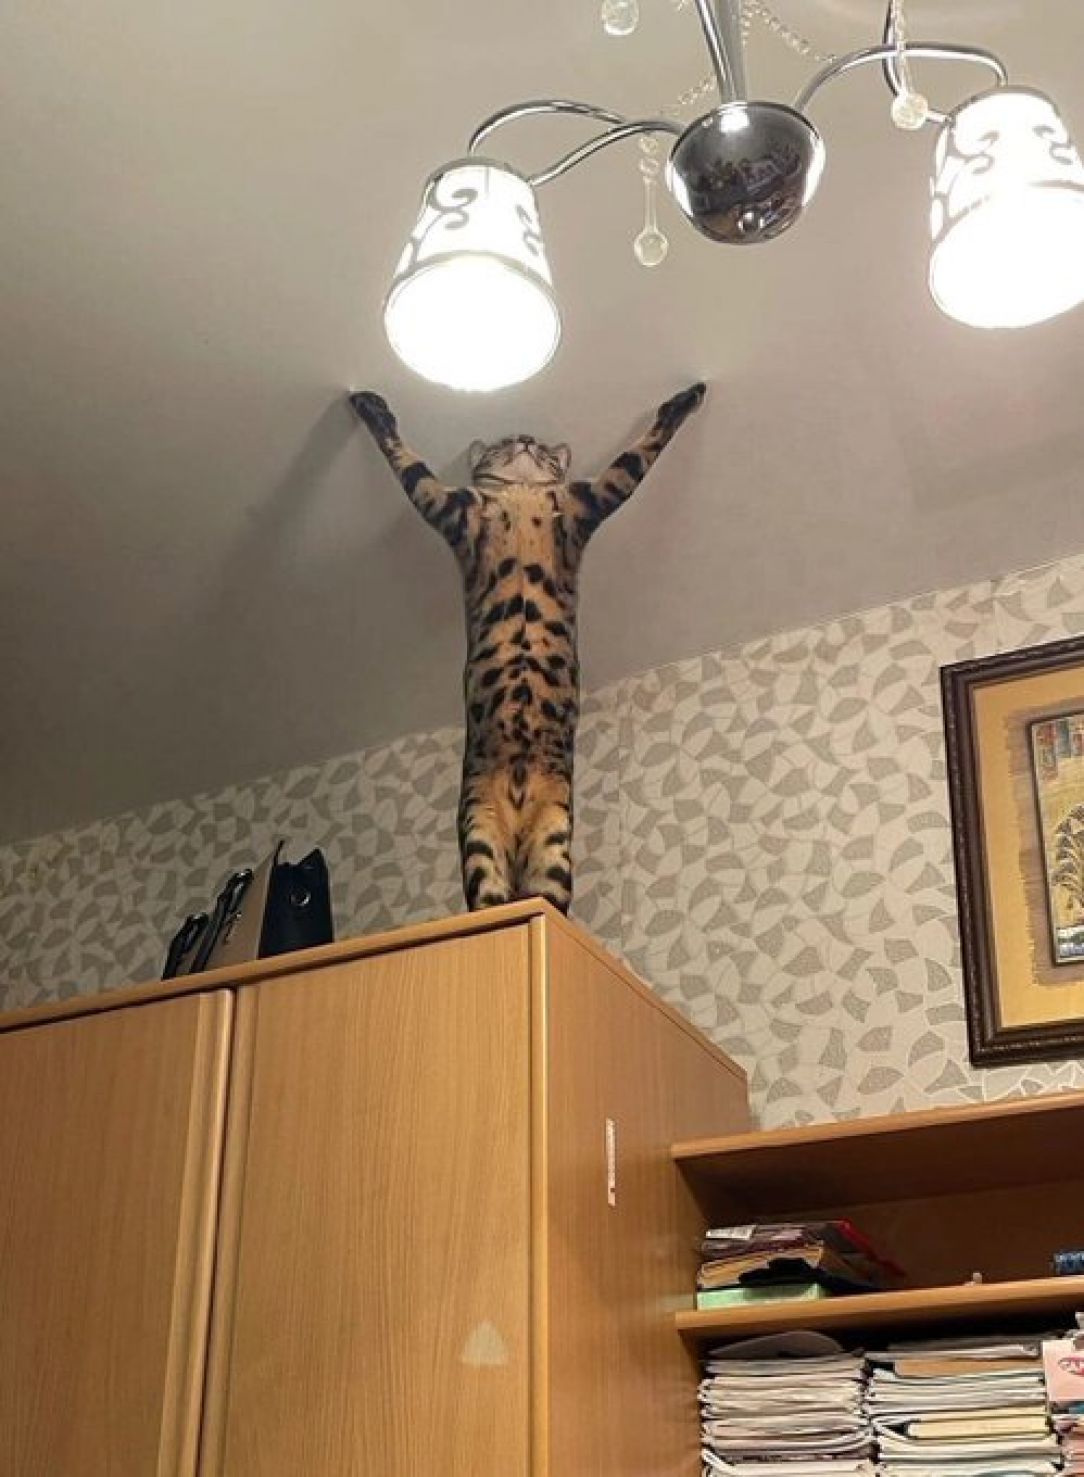 Forget Acrobats, This Acrocat is a Sight for Sore Eyes